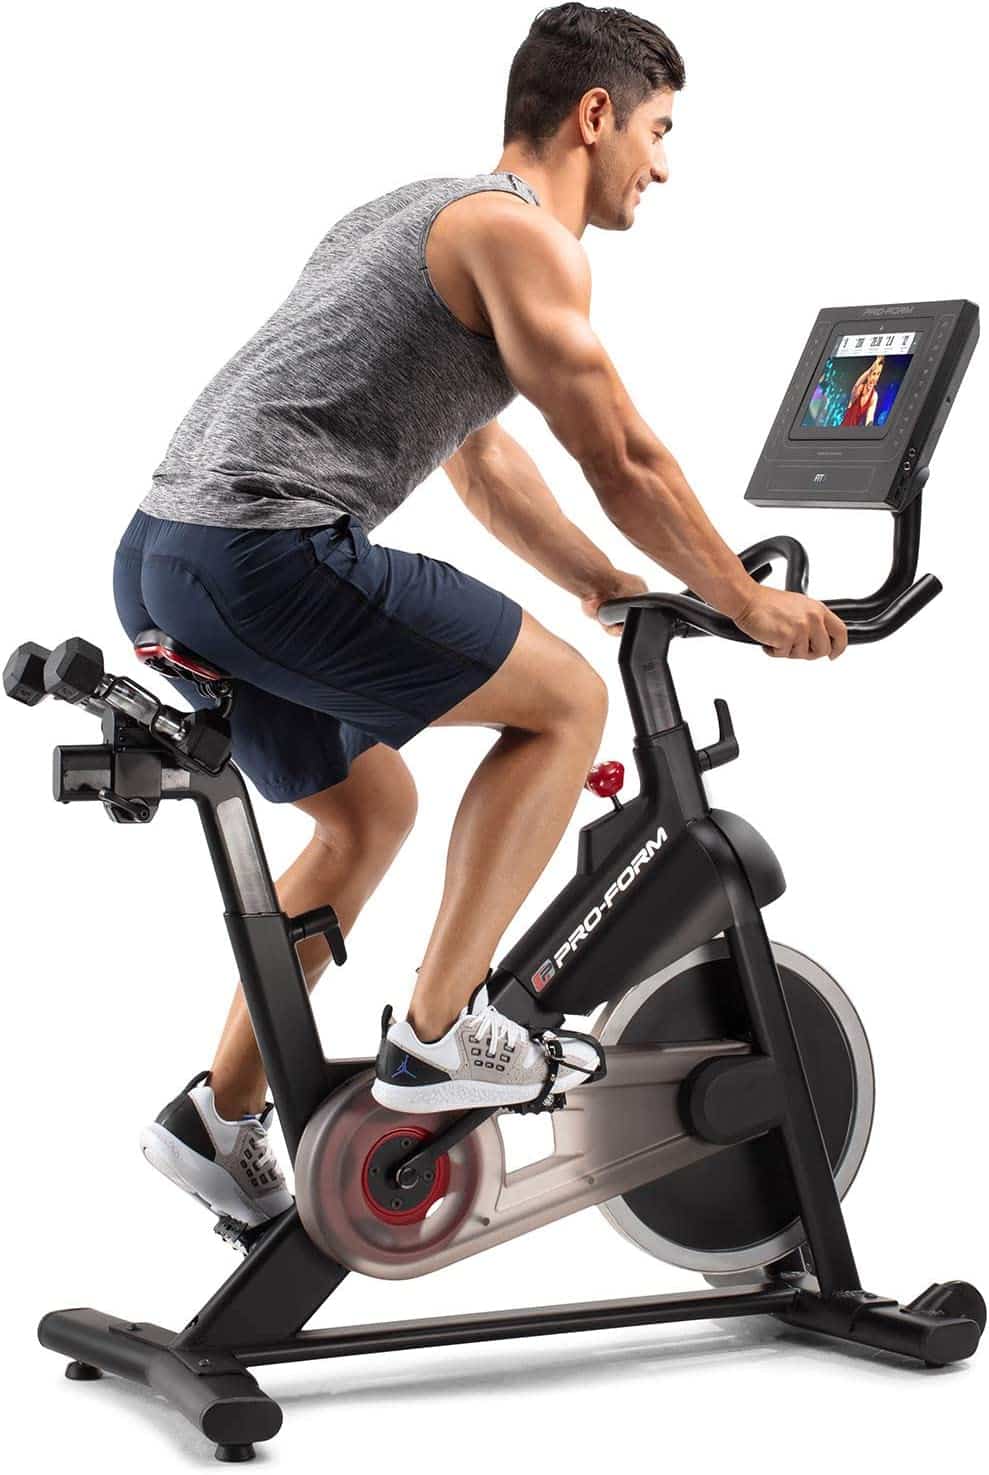 Proform Smart Power 10.0 Exercise Bike - with a male model cycling 